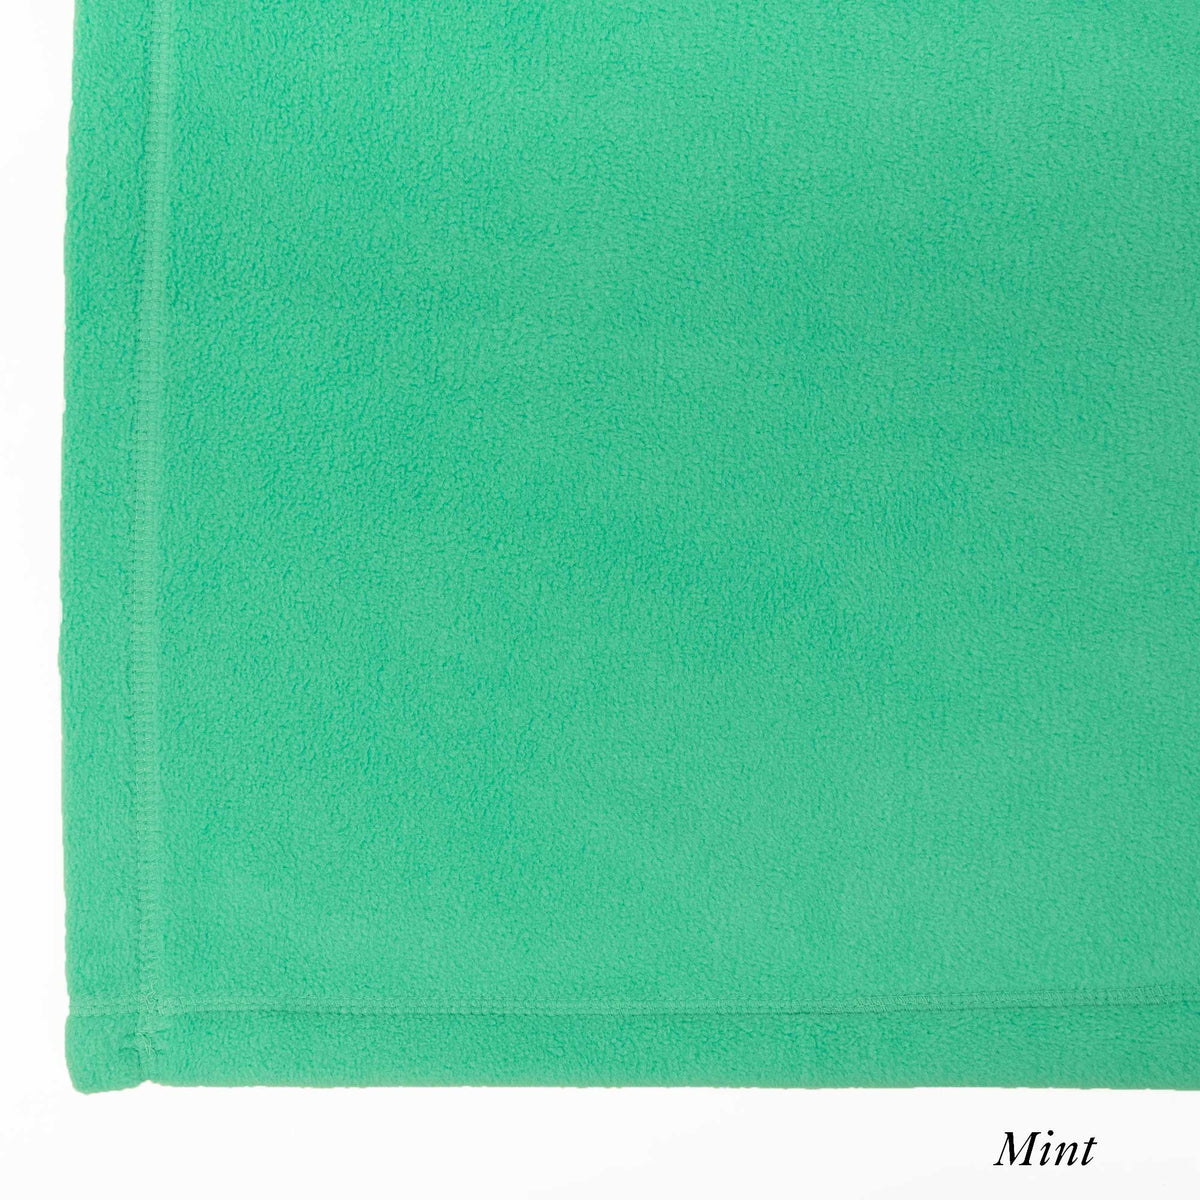 Mint - Big Ricky&#39;s Microfiber Cleaning Cloths - Micro Fiber Cleaning Cloths - American Blanket Company